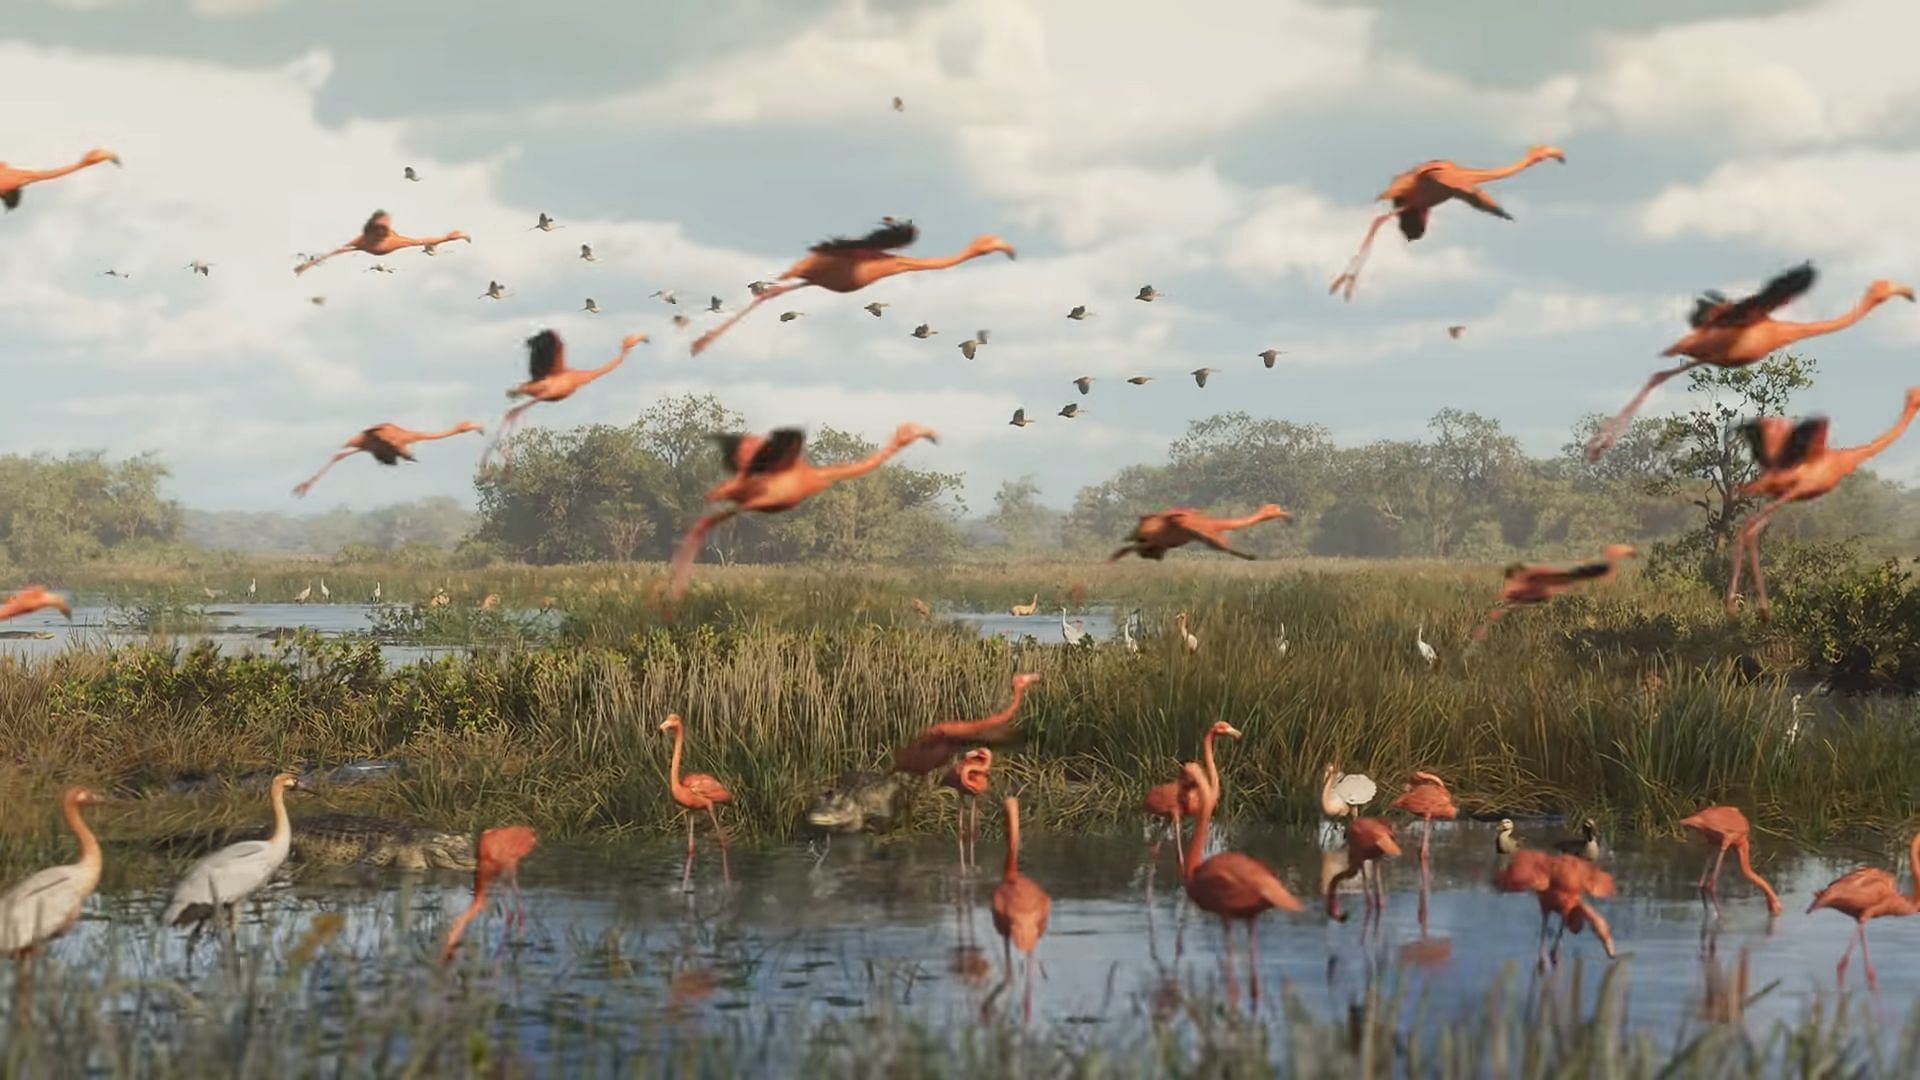 There are lots of flamingoes here (Image via Rockstar Games)